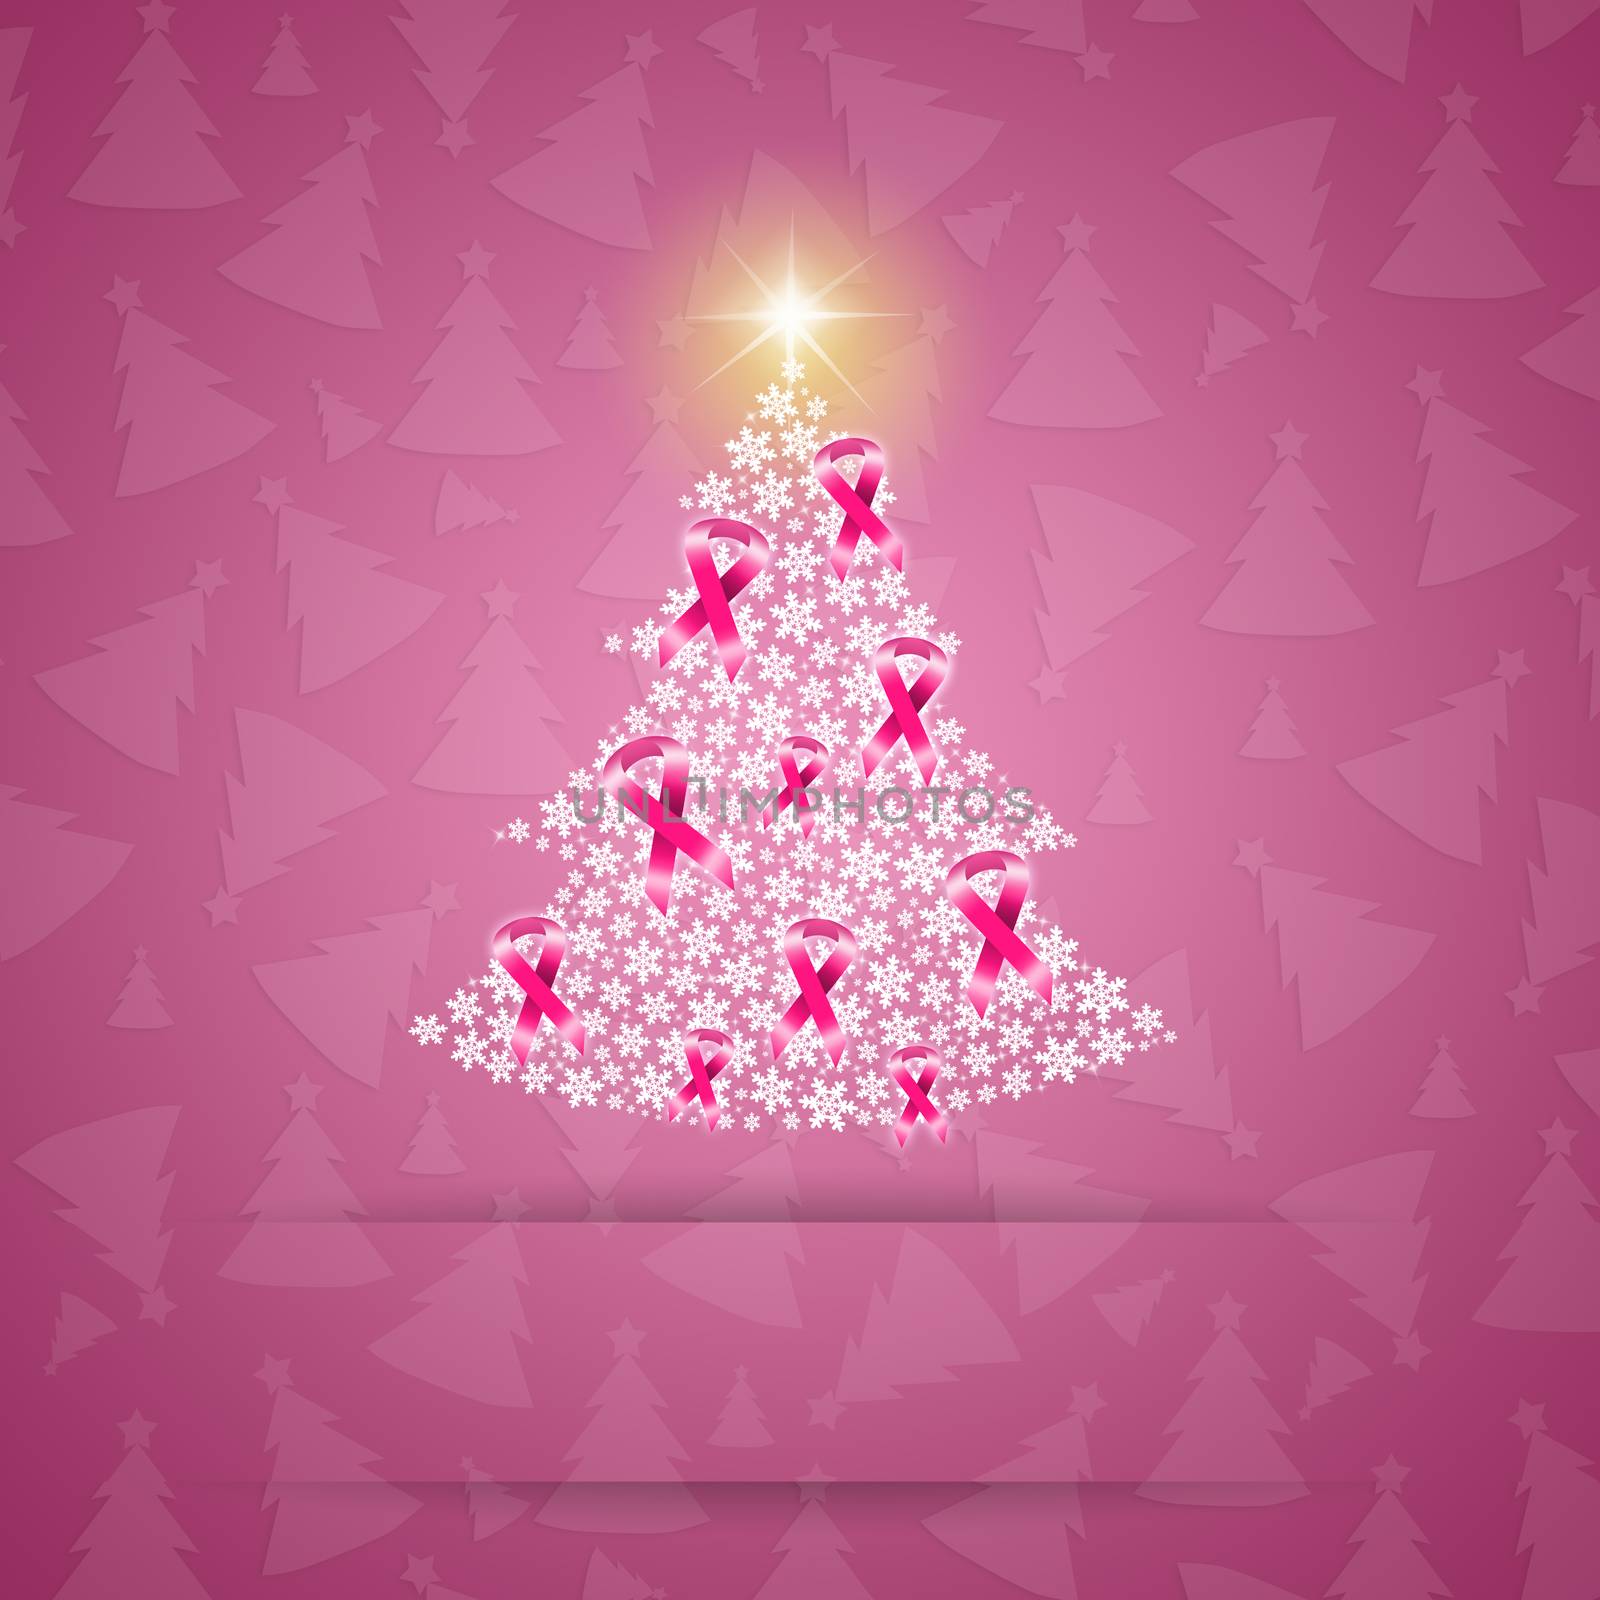 Christmas tree with awareness pink ribbons by sognolucido